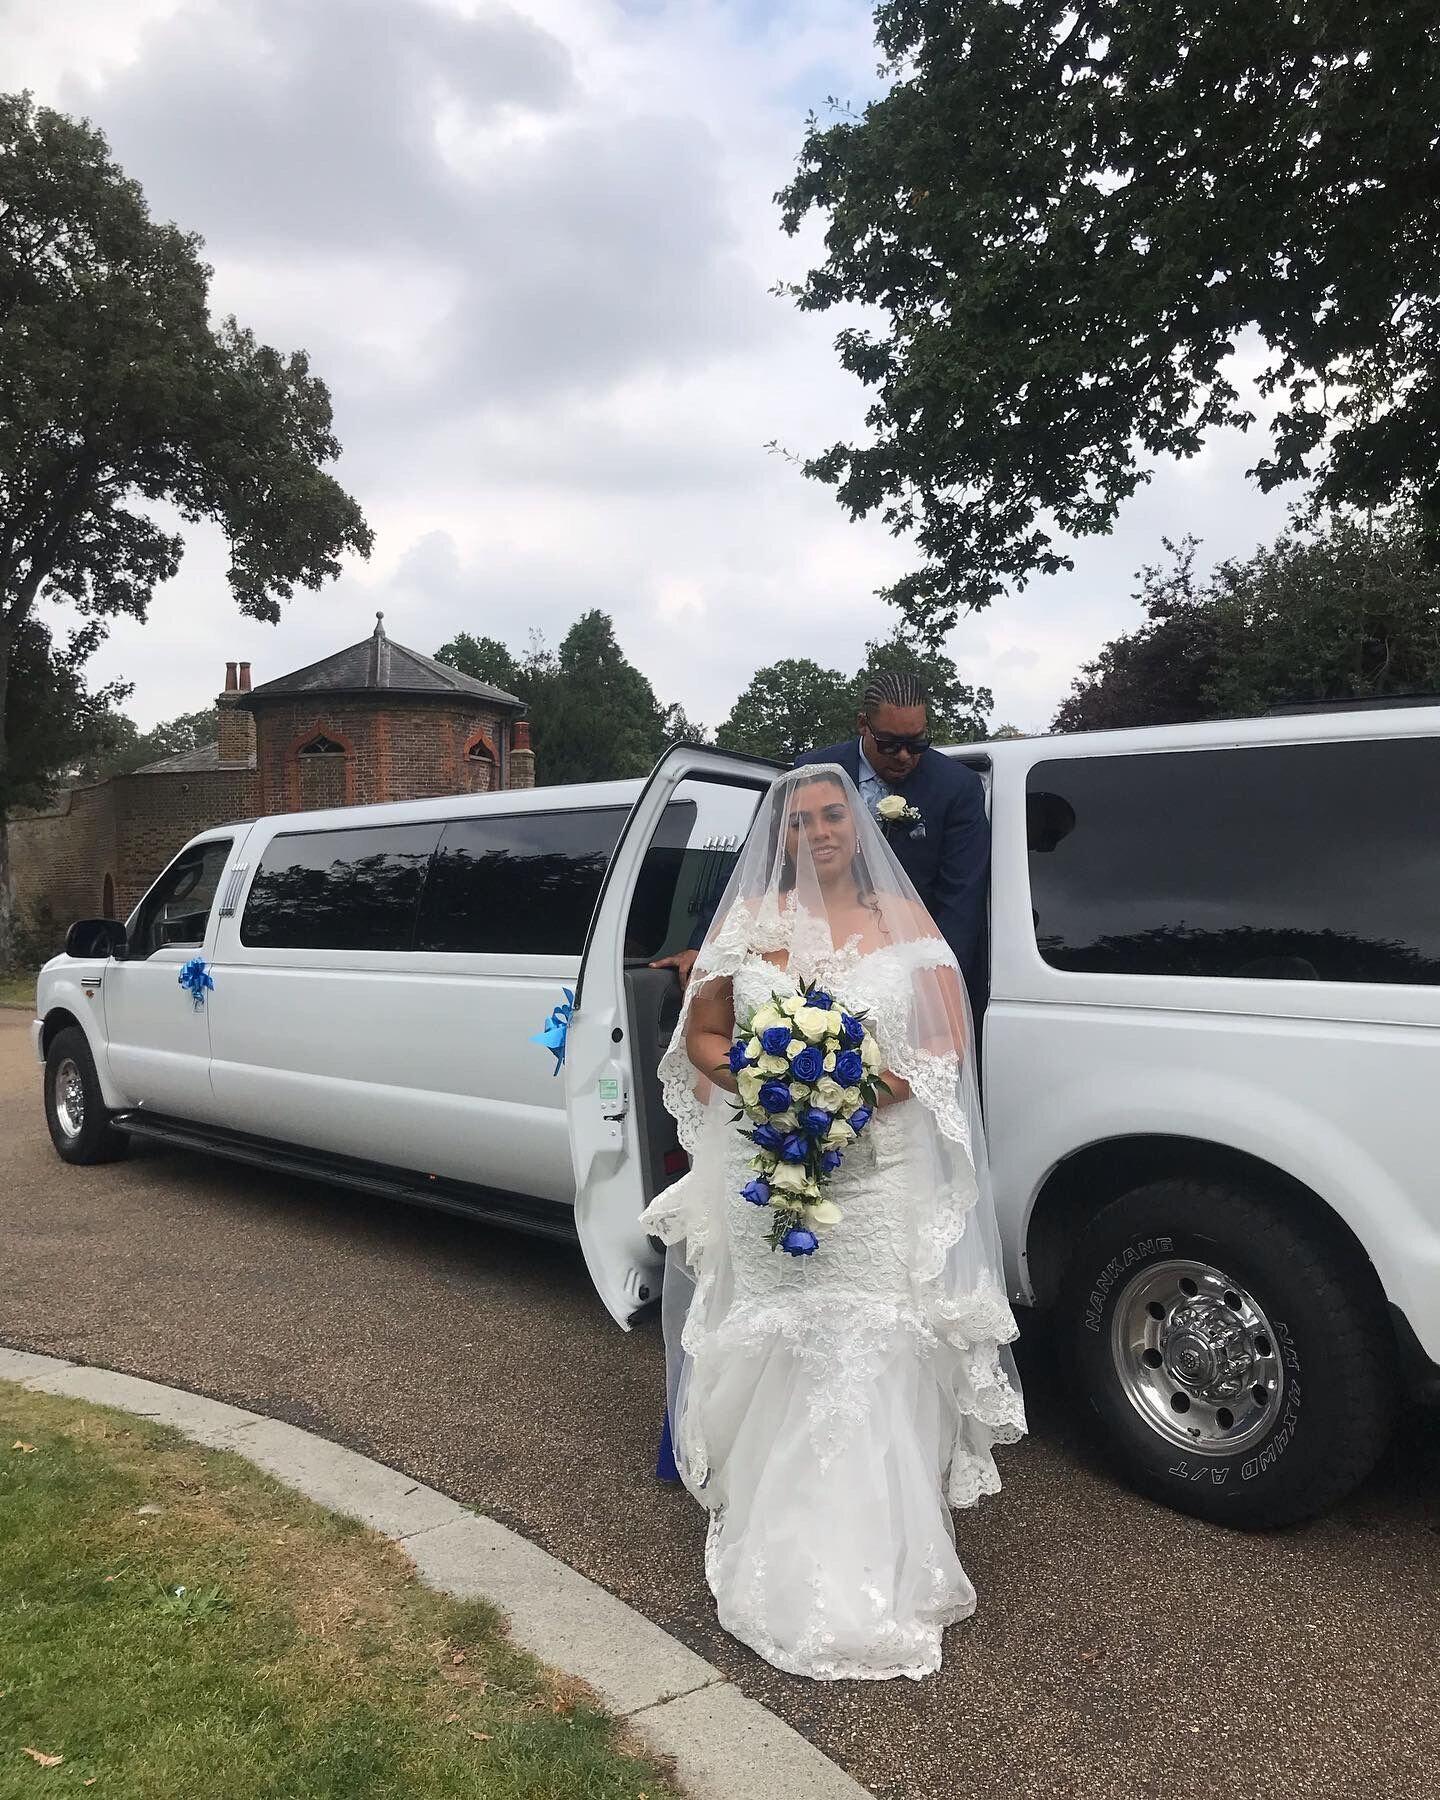 Images first choice limo hire